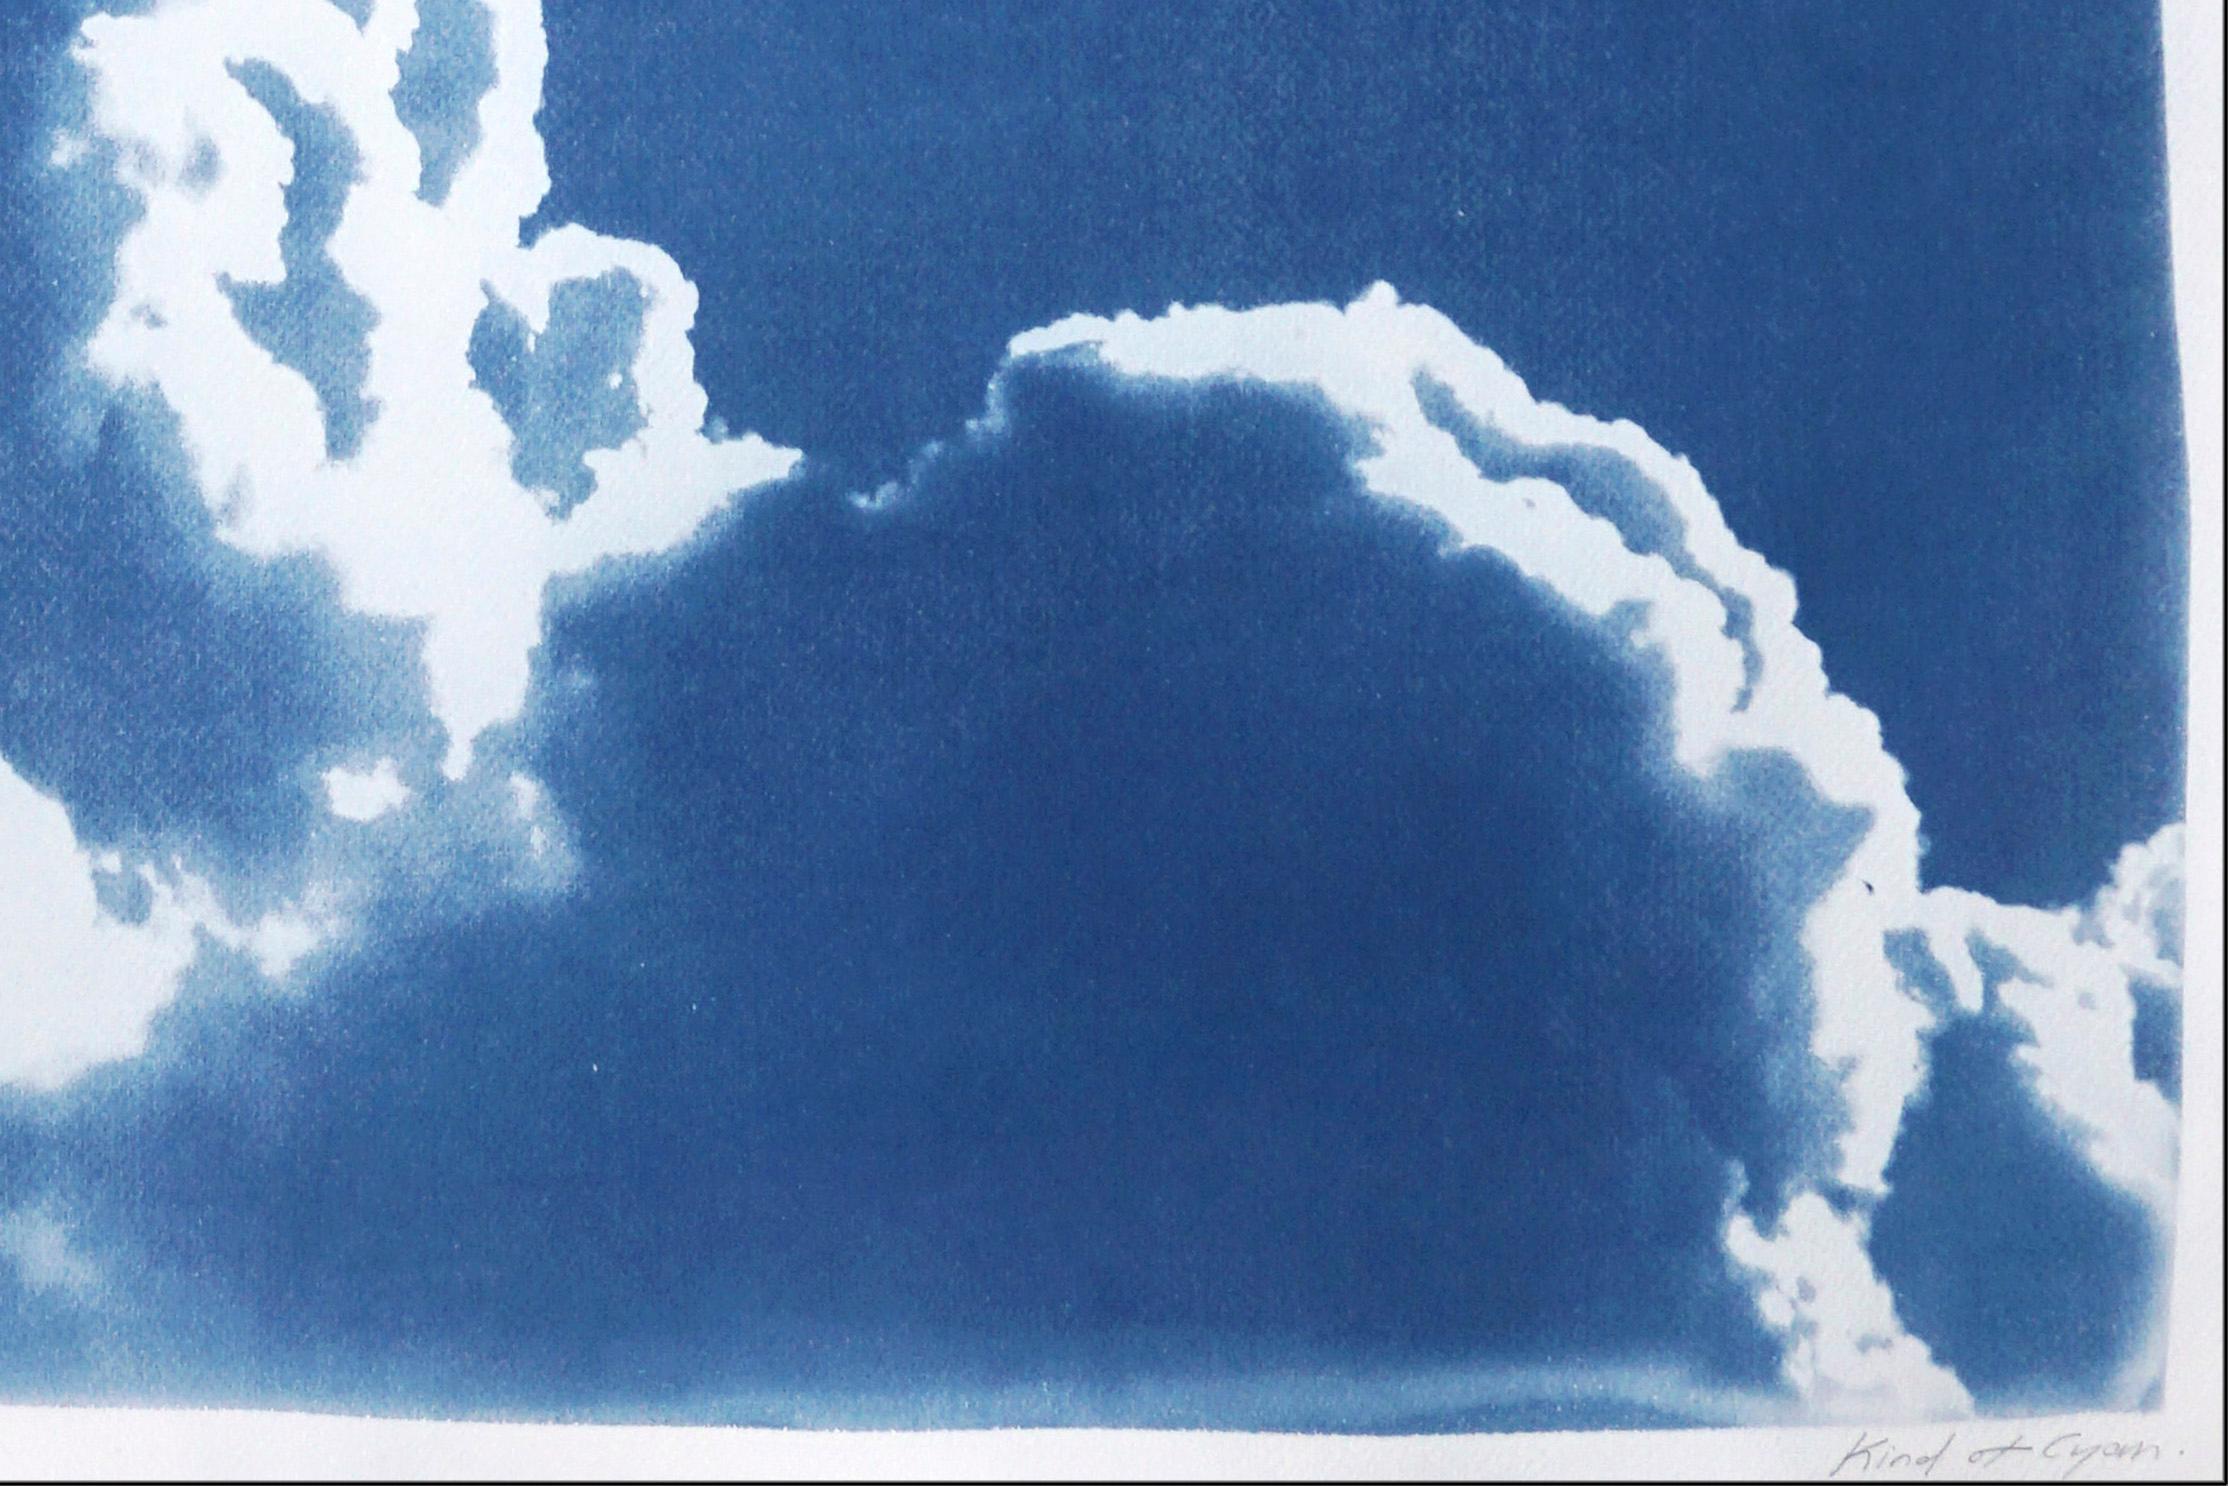 This is an exclusive handprinted limited edition cyanotype diptych of foamy gorgeous clouds.

Details:
+ Title: Floating Clouds Diptych
+ Year: 2021
+ Edition Size: 20
+ Stamped and Certificate of Authenticity provided
+ Measurements : 100x210 cm